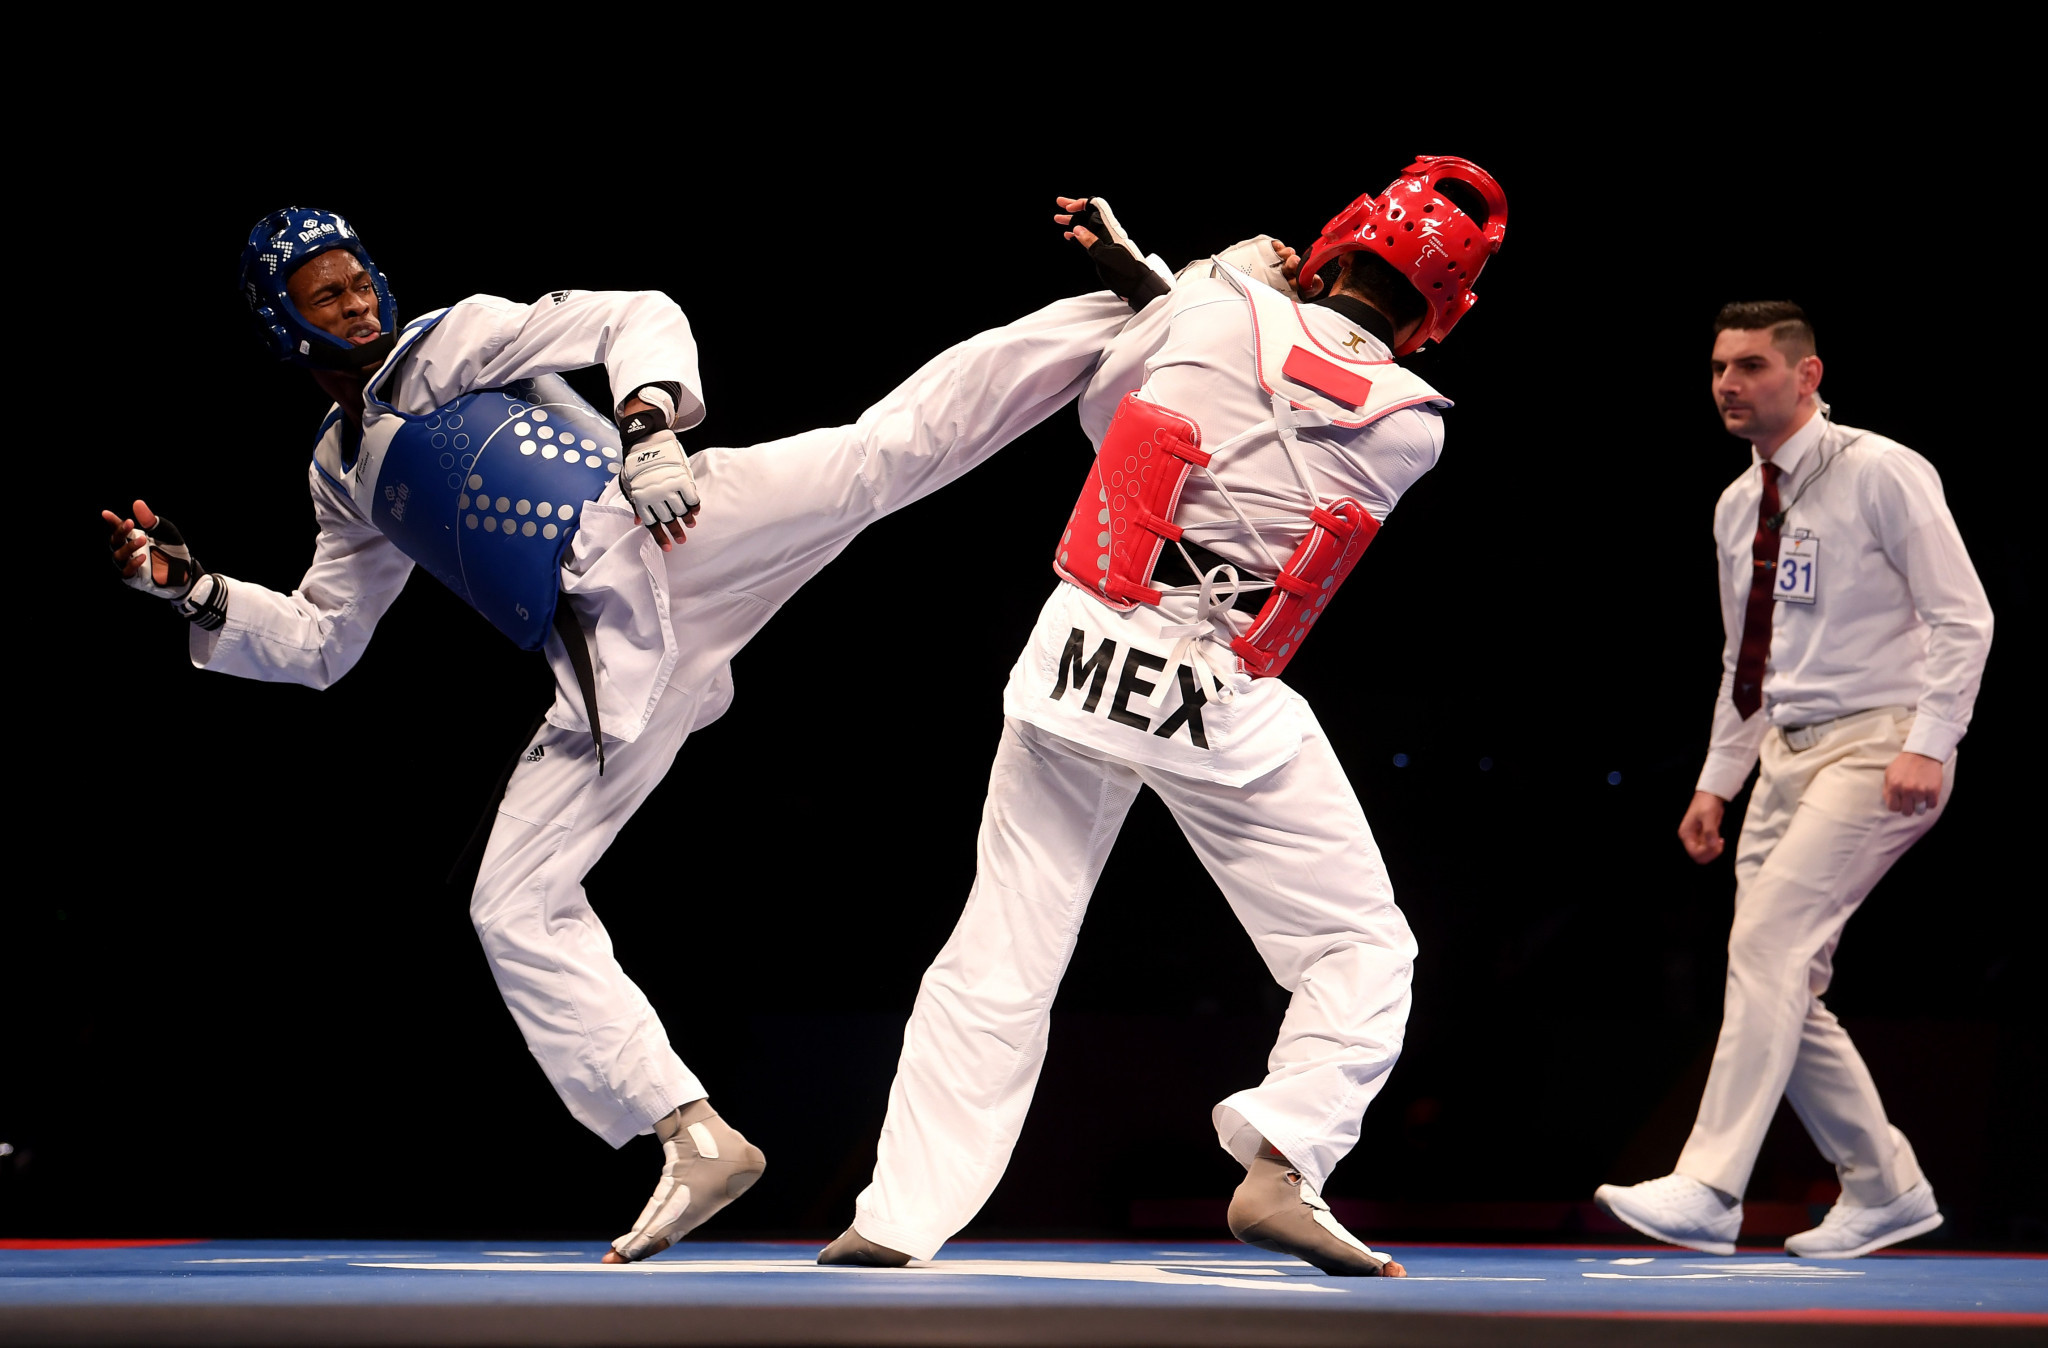 The next edition of the World Taekwondo Championships is due to take place in 2021 ©Getty Images